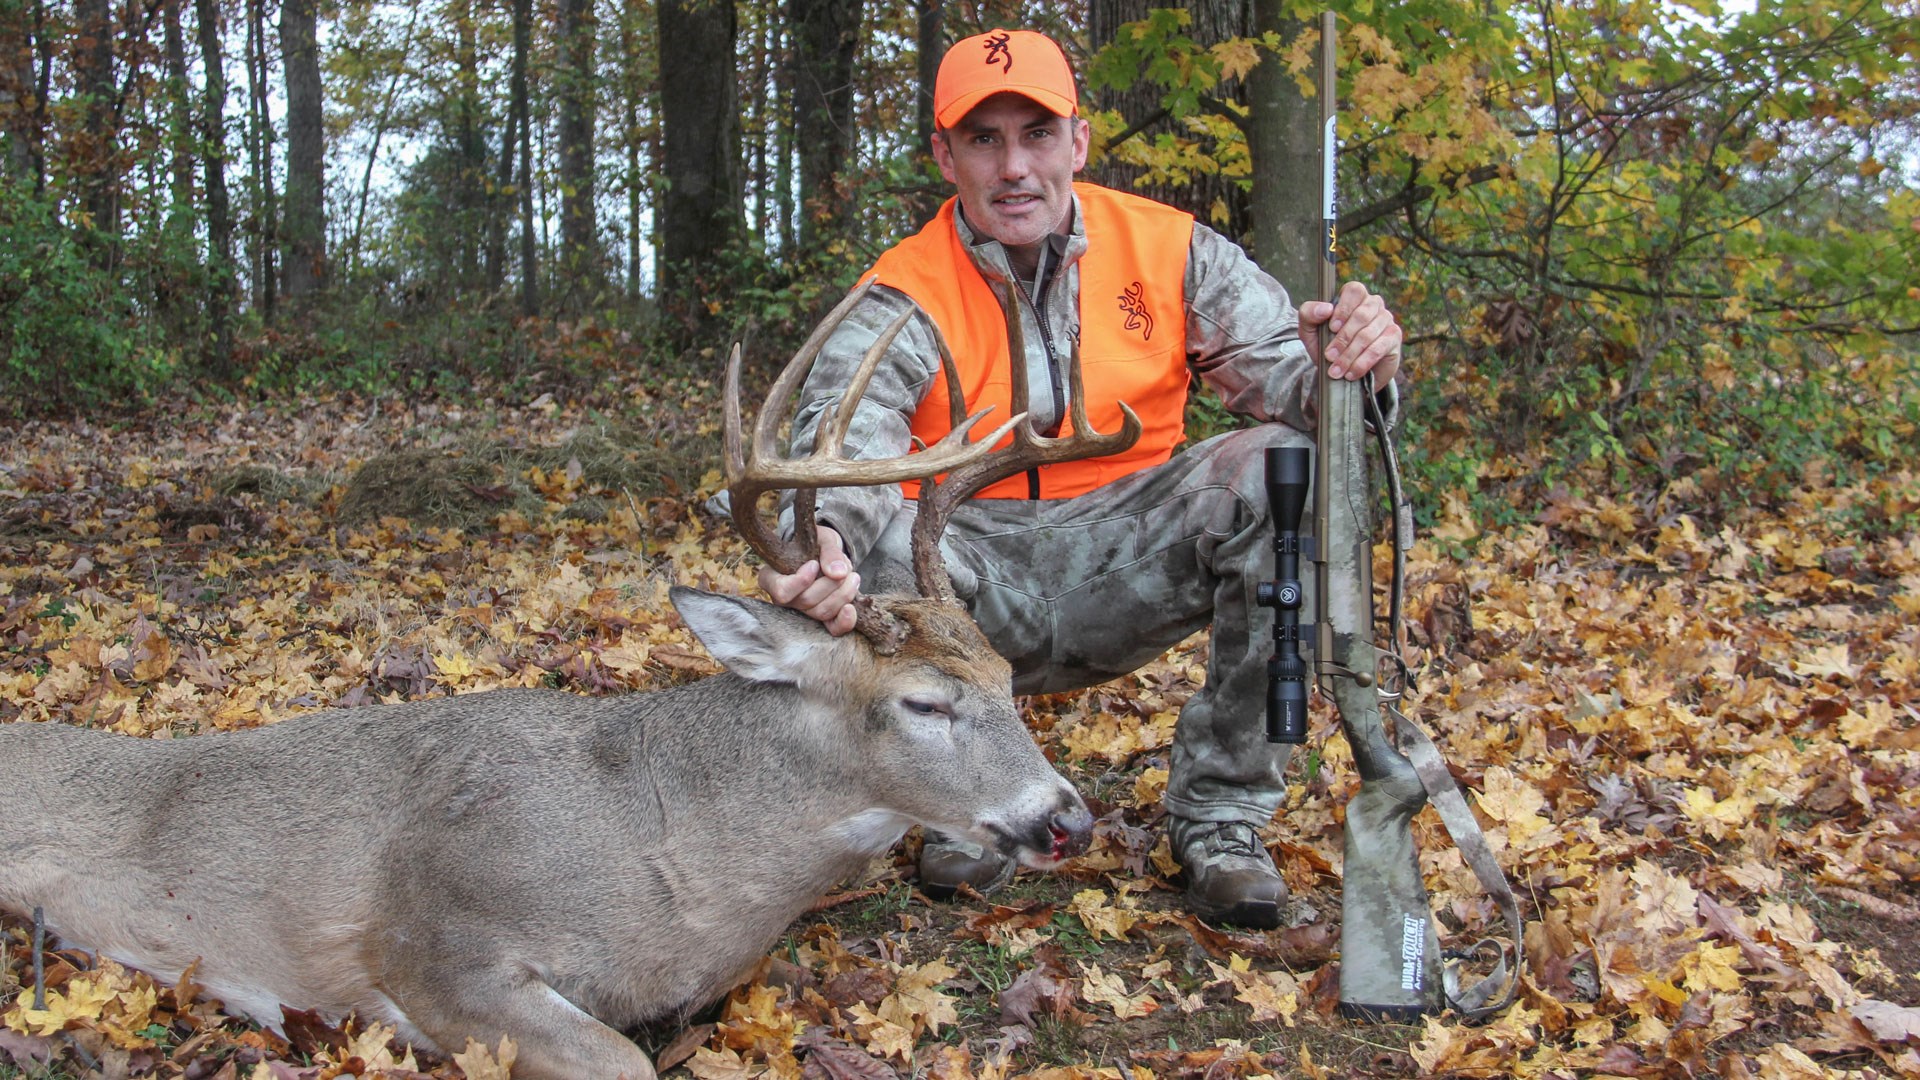 Hunter with deer and rifle